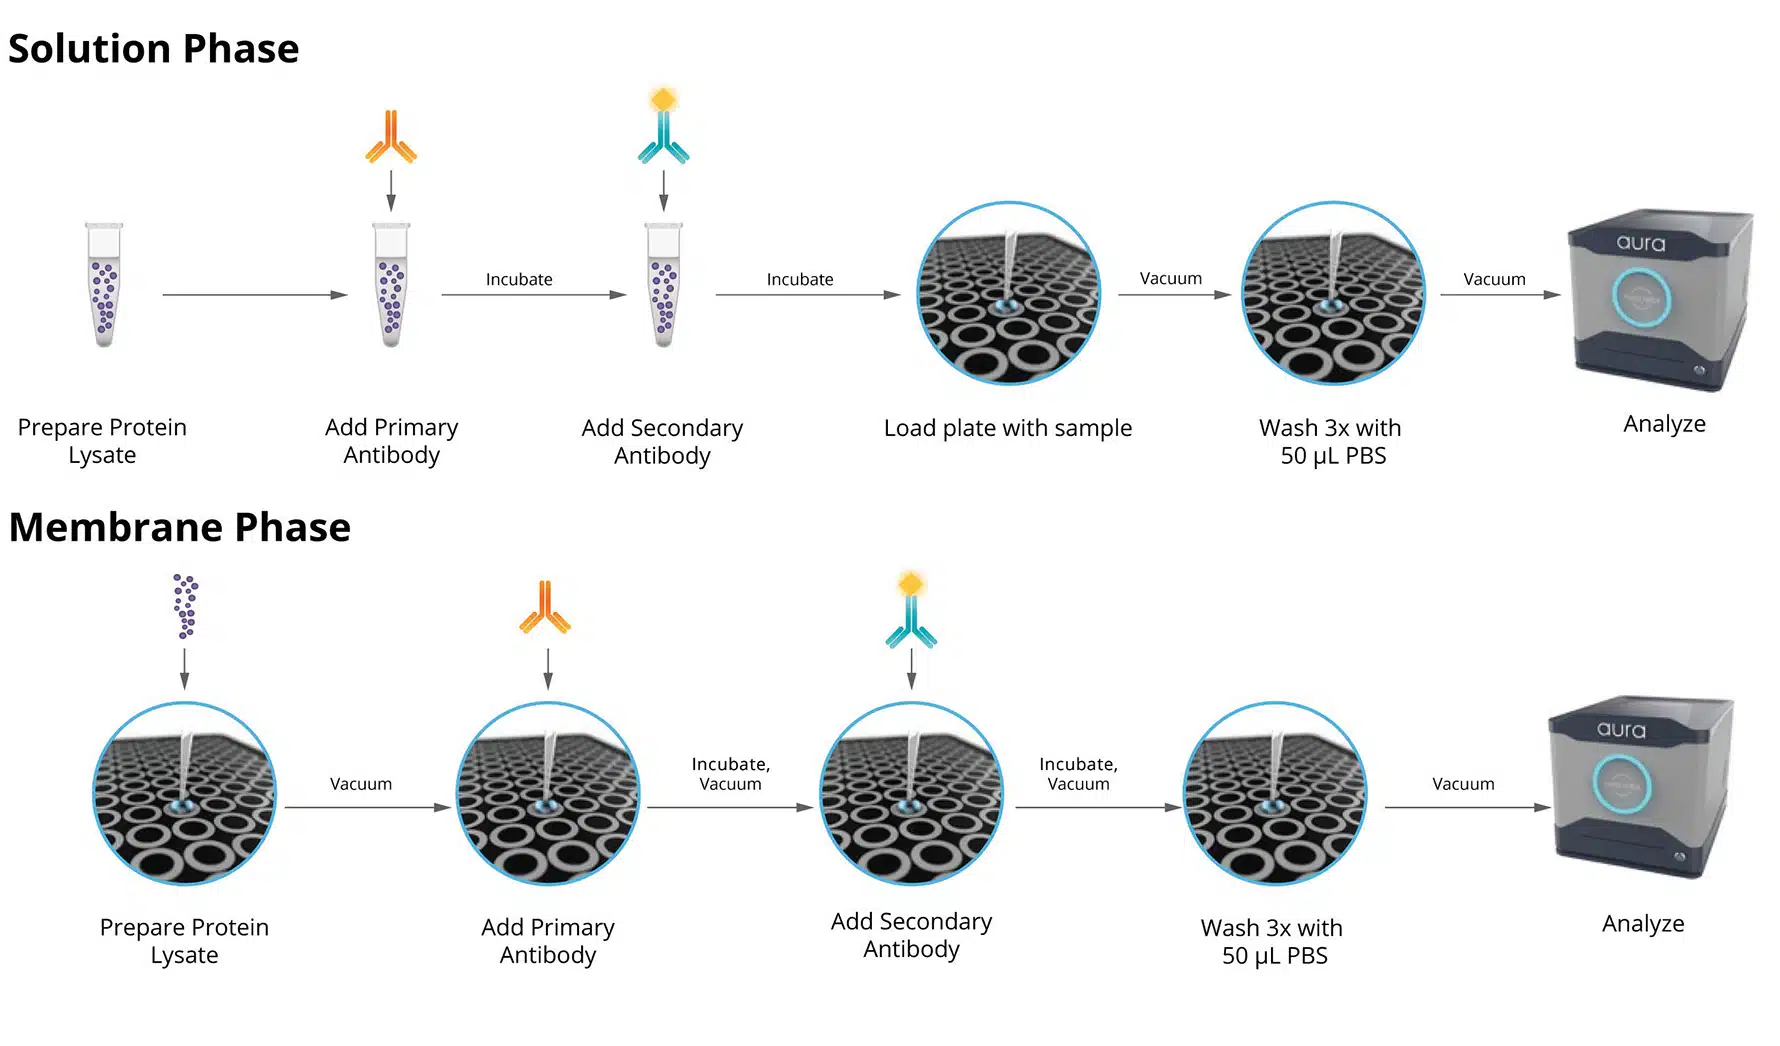 There are two methods for Aura immunoassay. One in which the antibody is applied in solution, the other while the sample is suspended on the membrane.